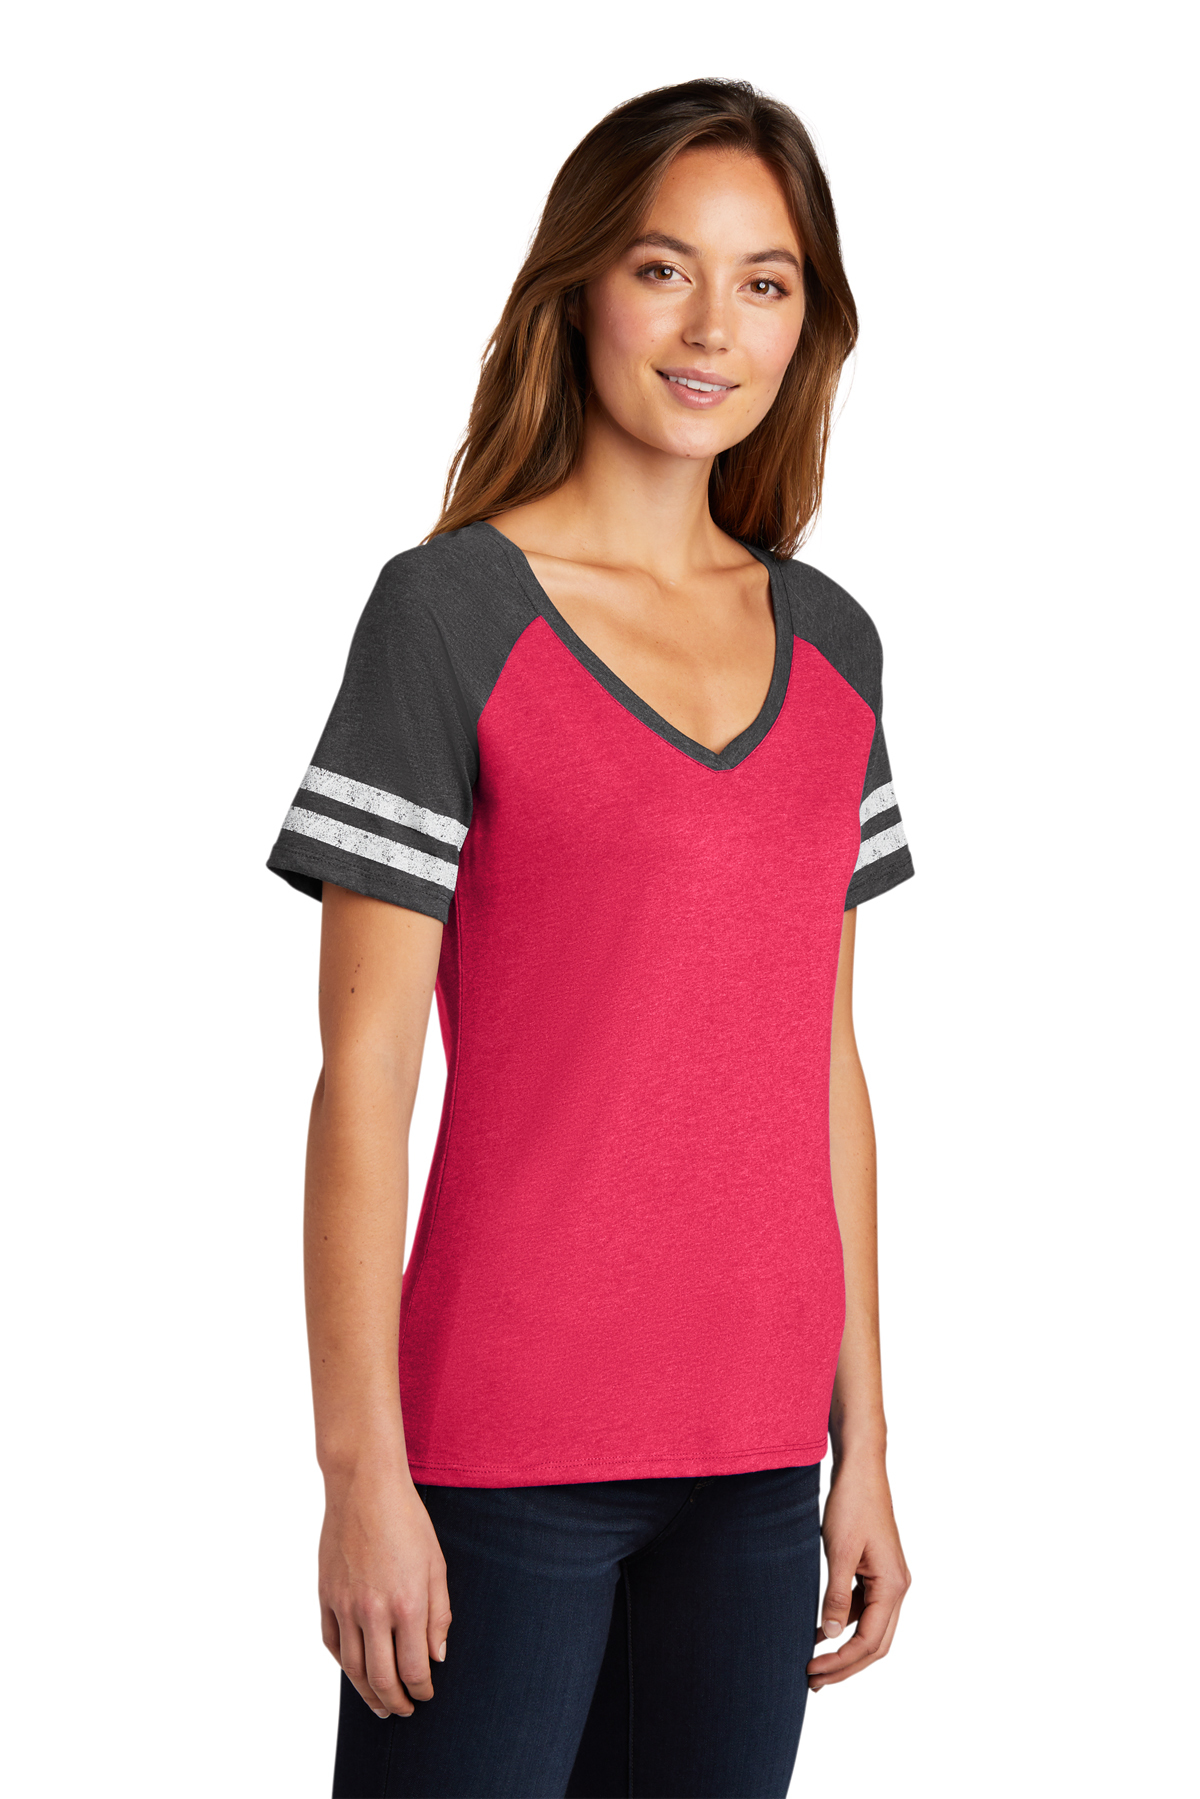 DM476 NEW District Made® Ladies Game V-Neck Tee 